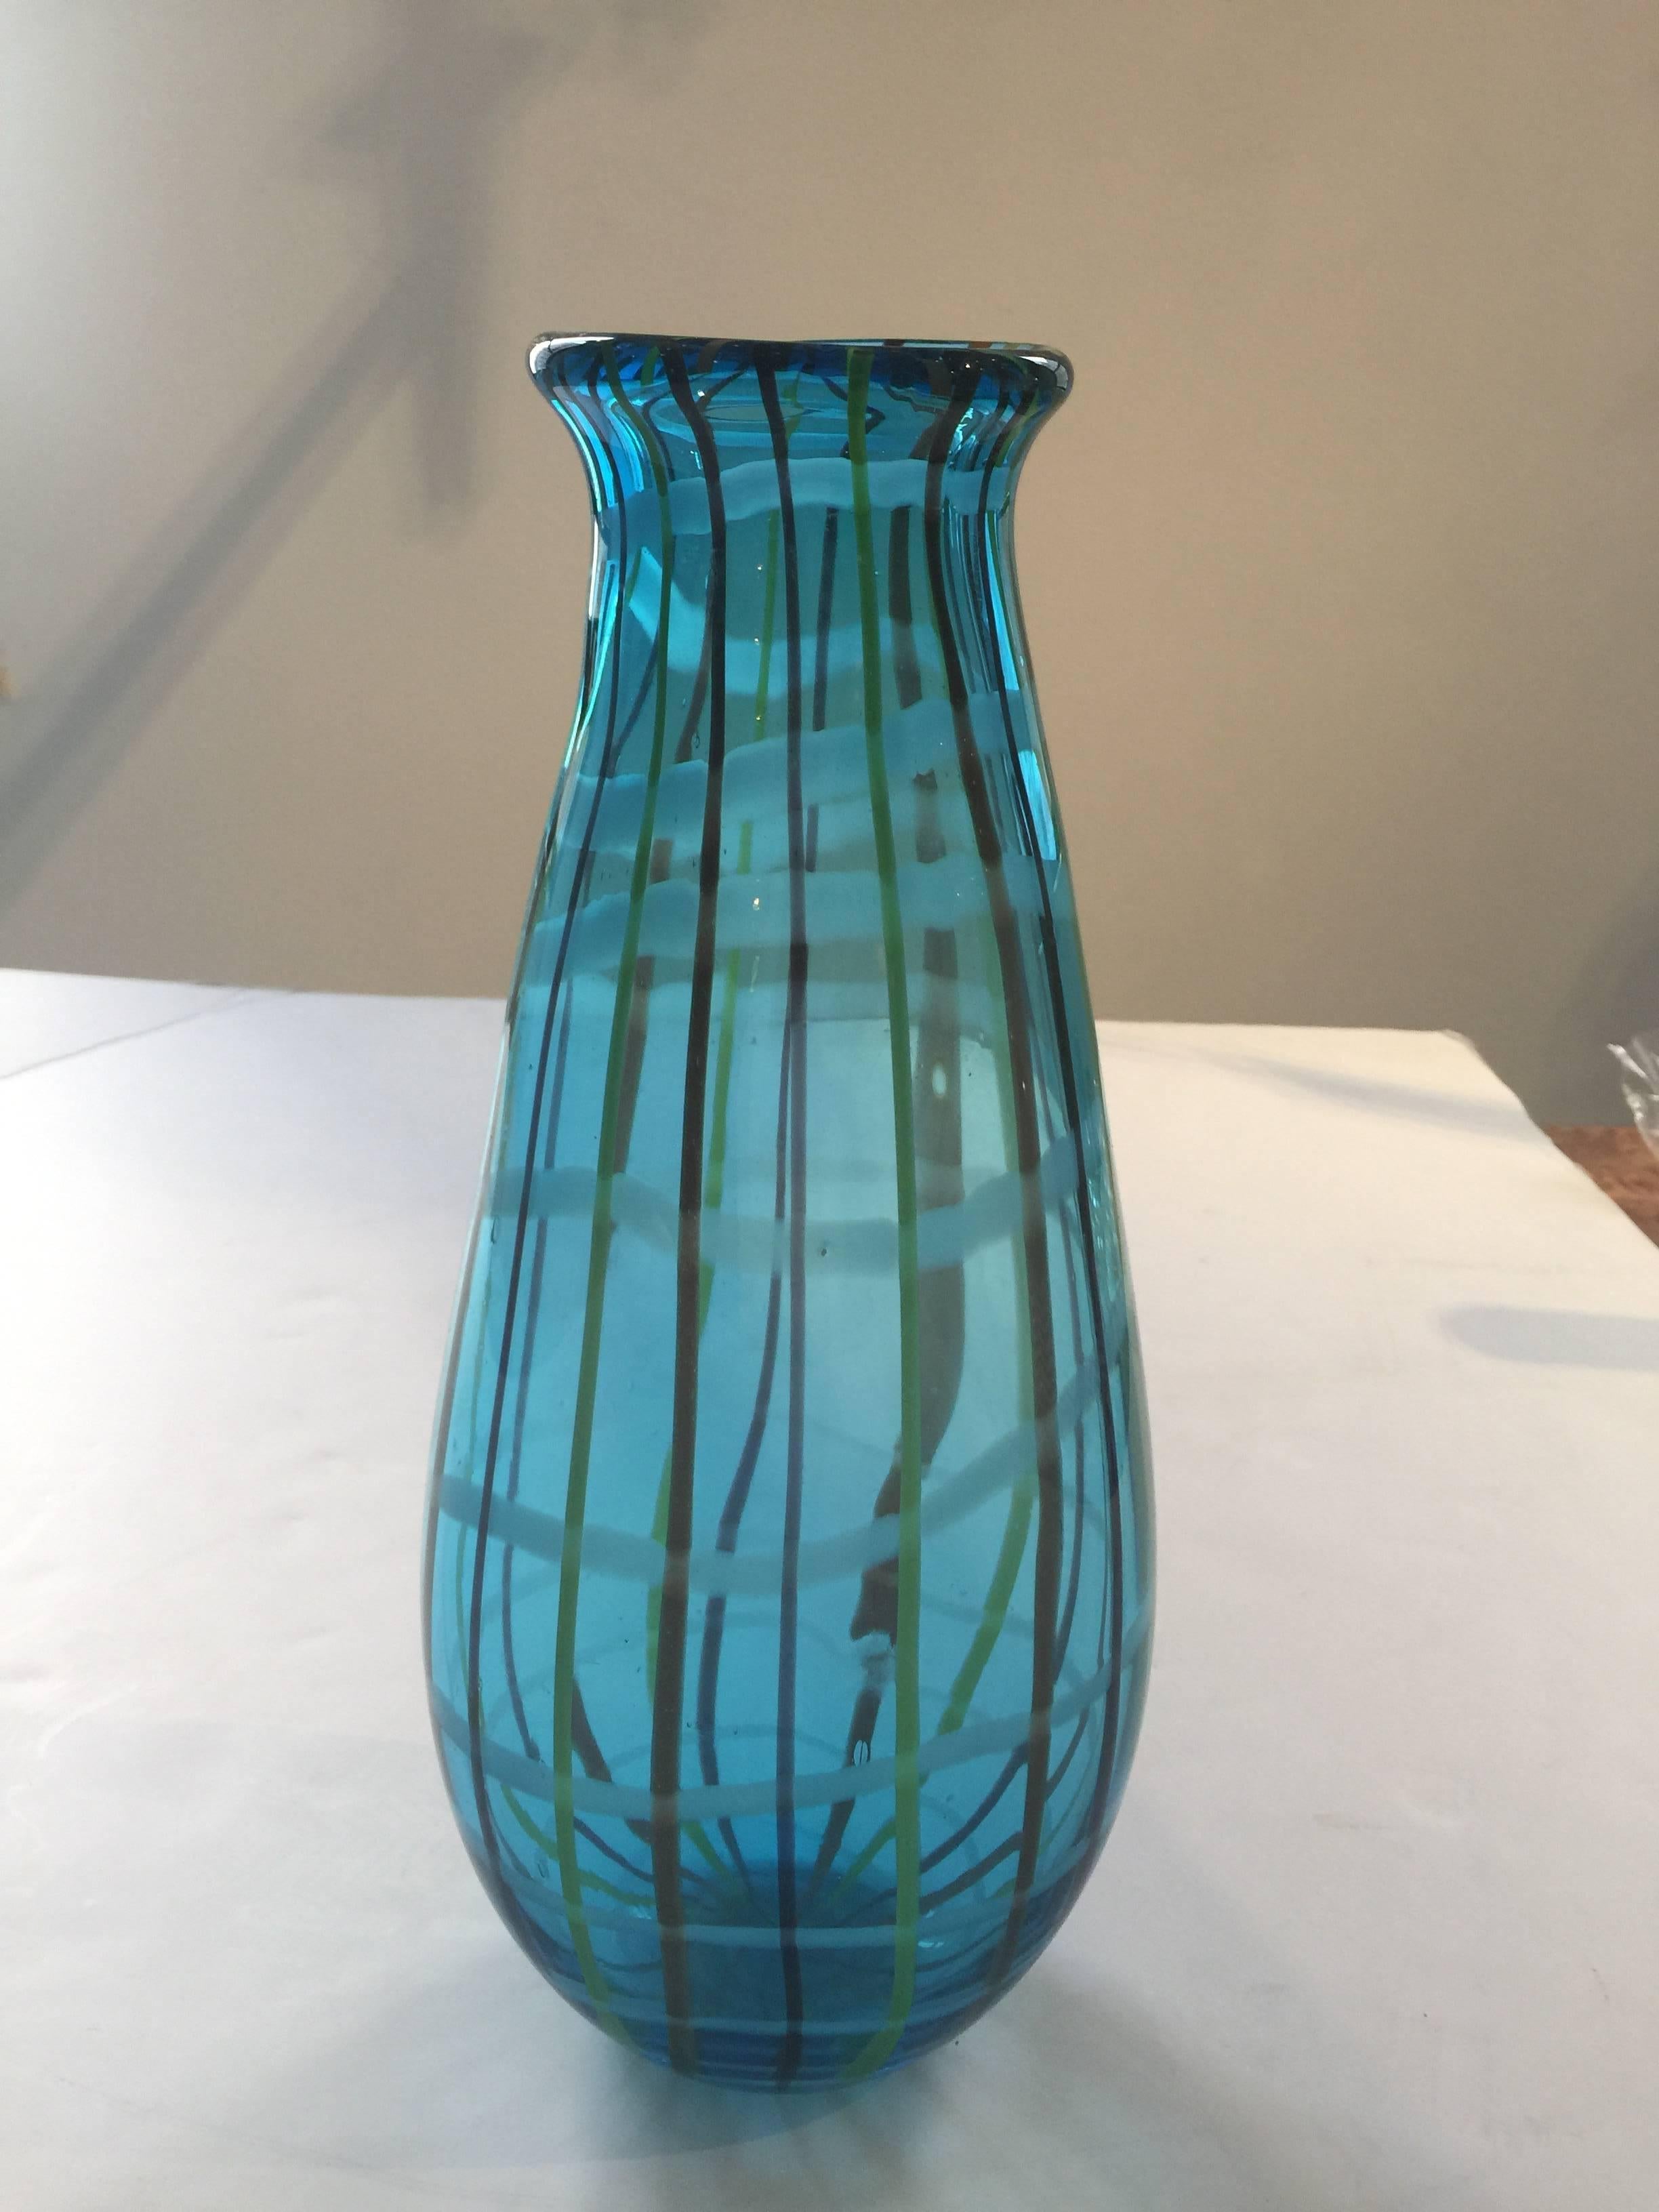 A thick glass vase in blue-green with an applied multi-color striped pattern, Italy, circa 1970.
Dimensions: 15